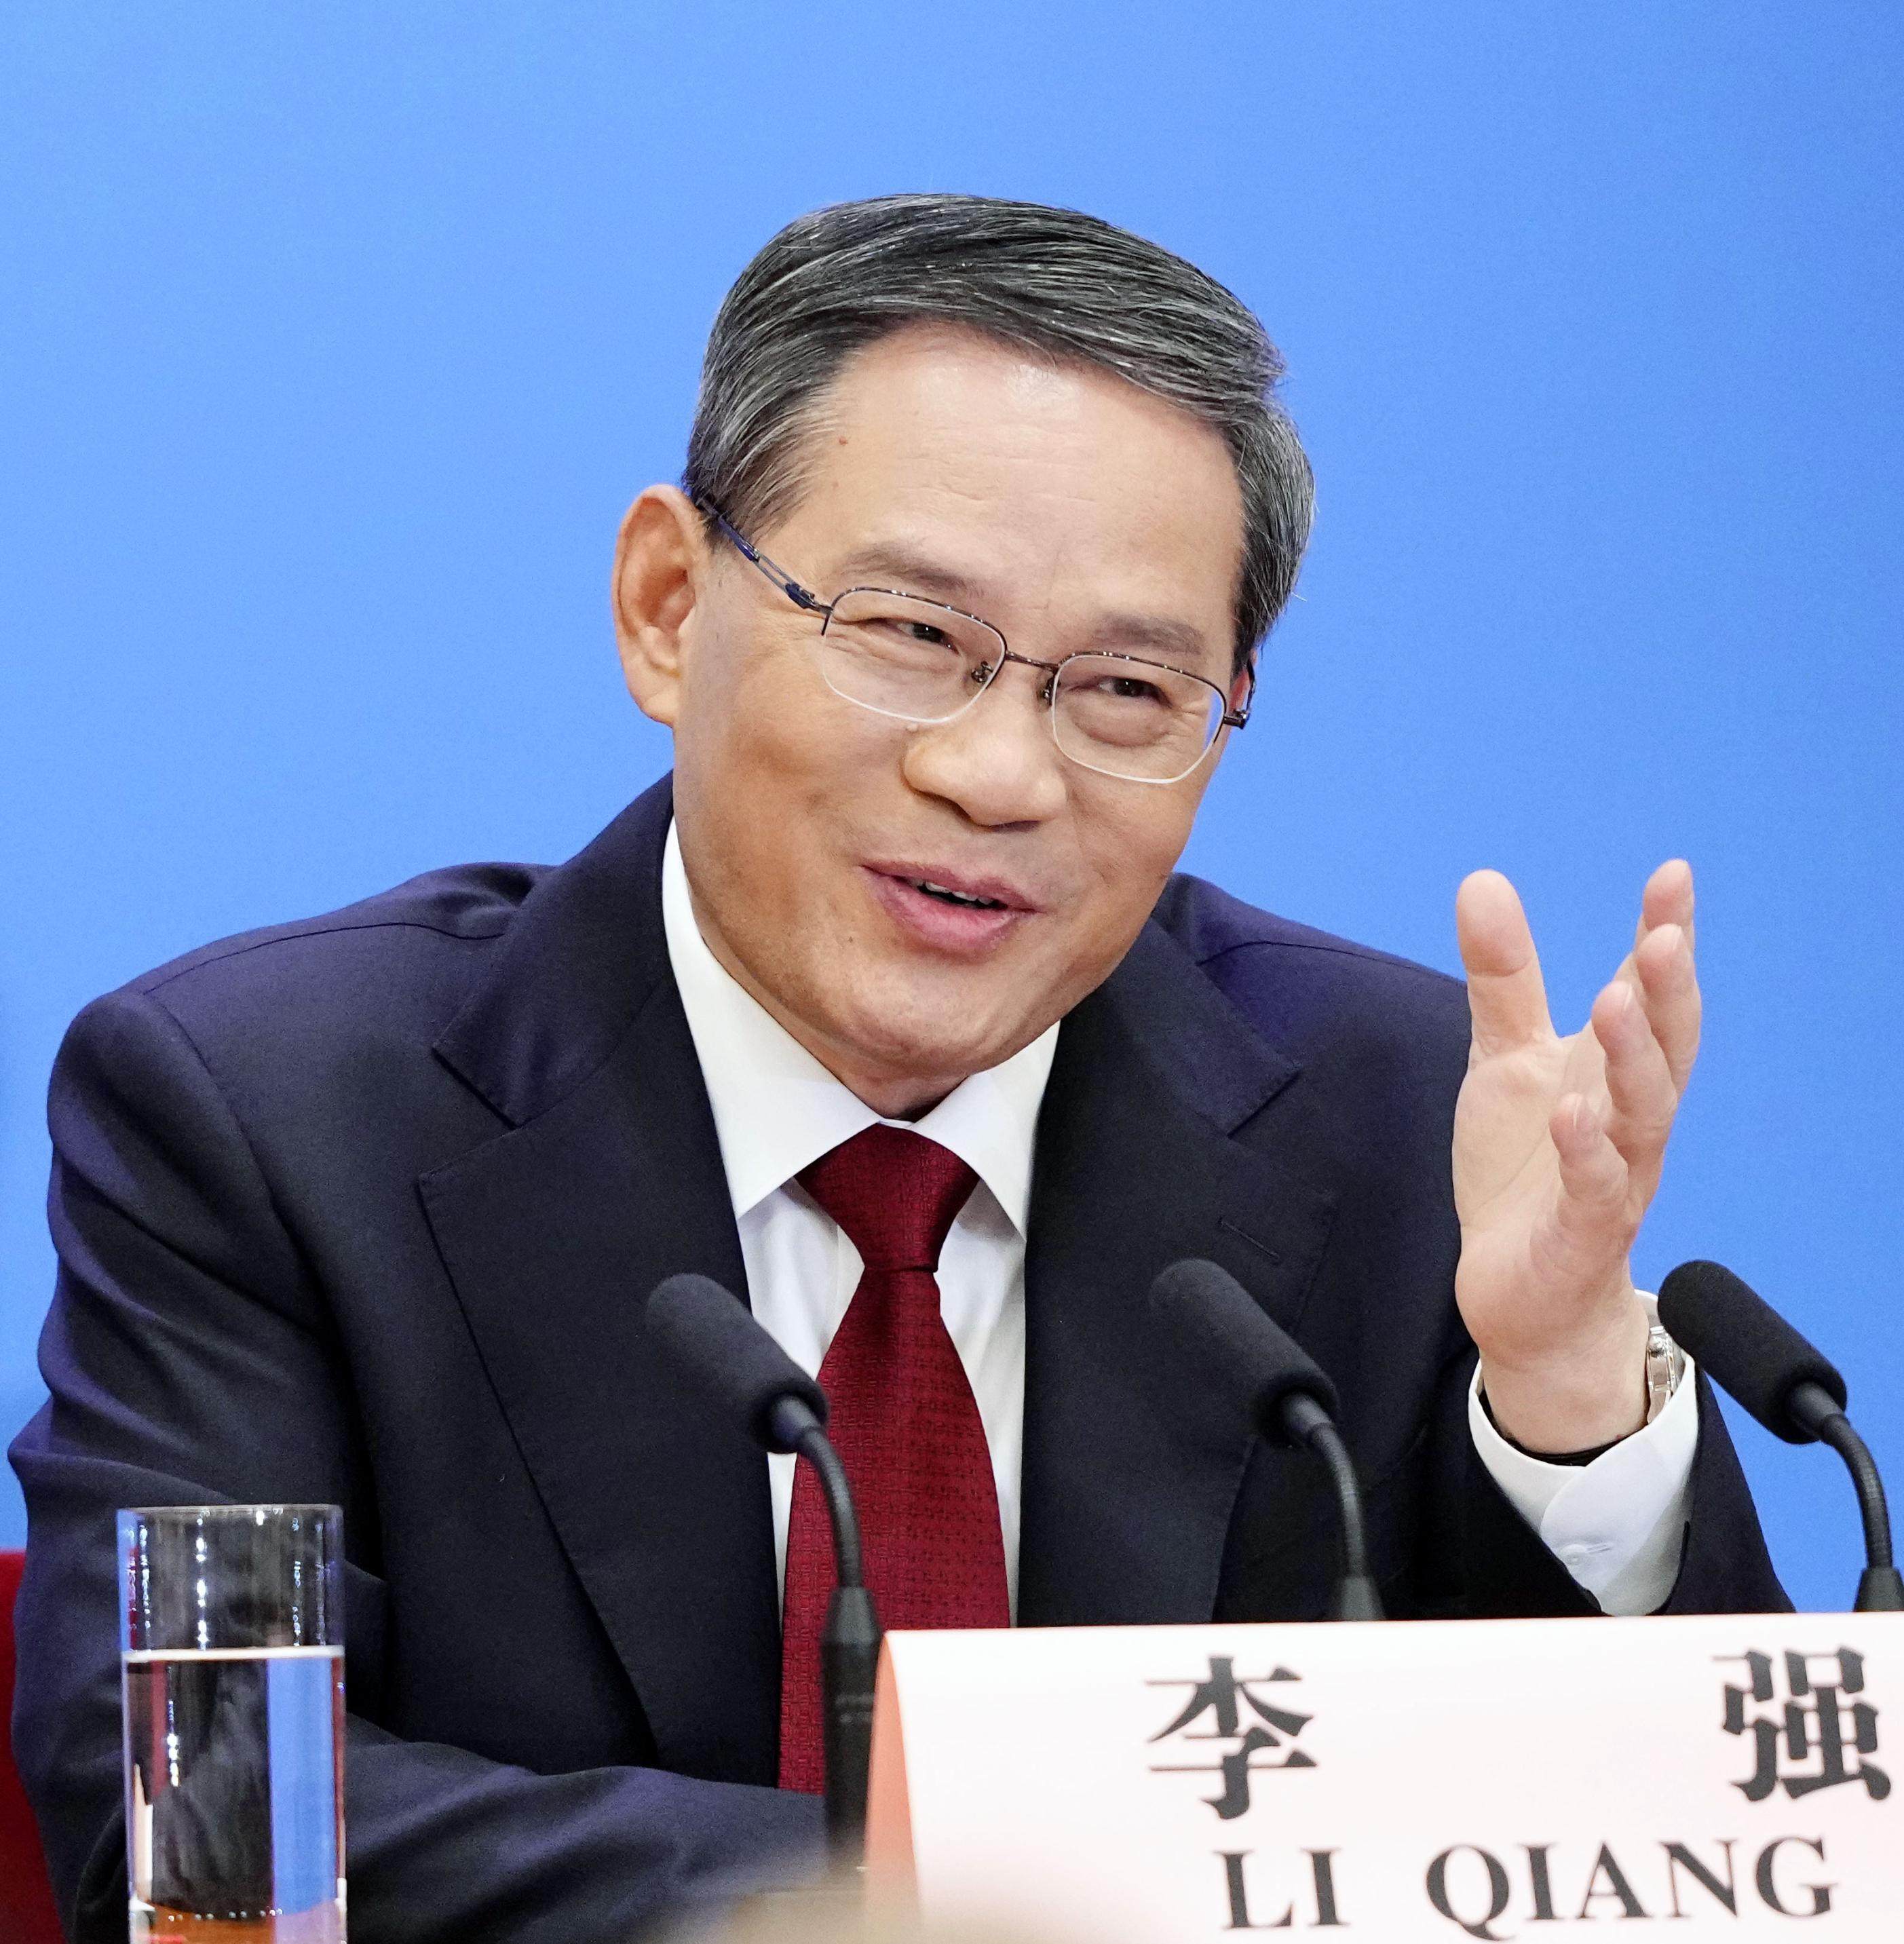 Premier Li Qiang addressed foreign business leaders, politicians and researchers at the annual China Development Forum in Beijing. Photo: Kyodo